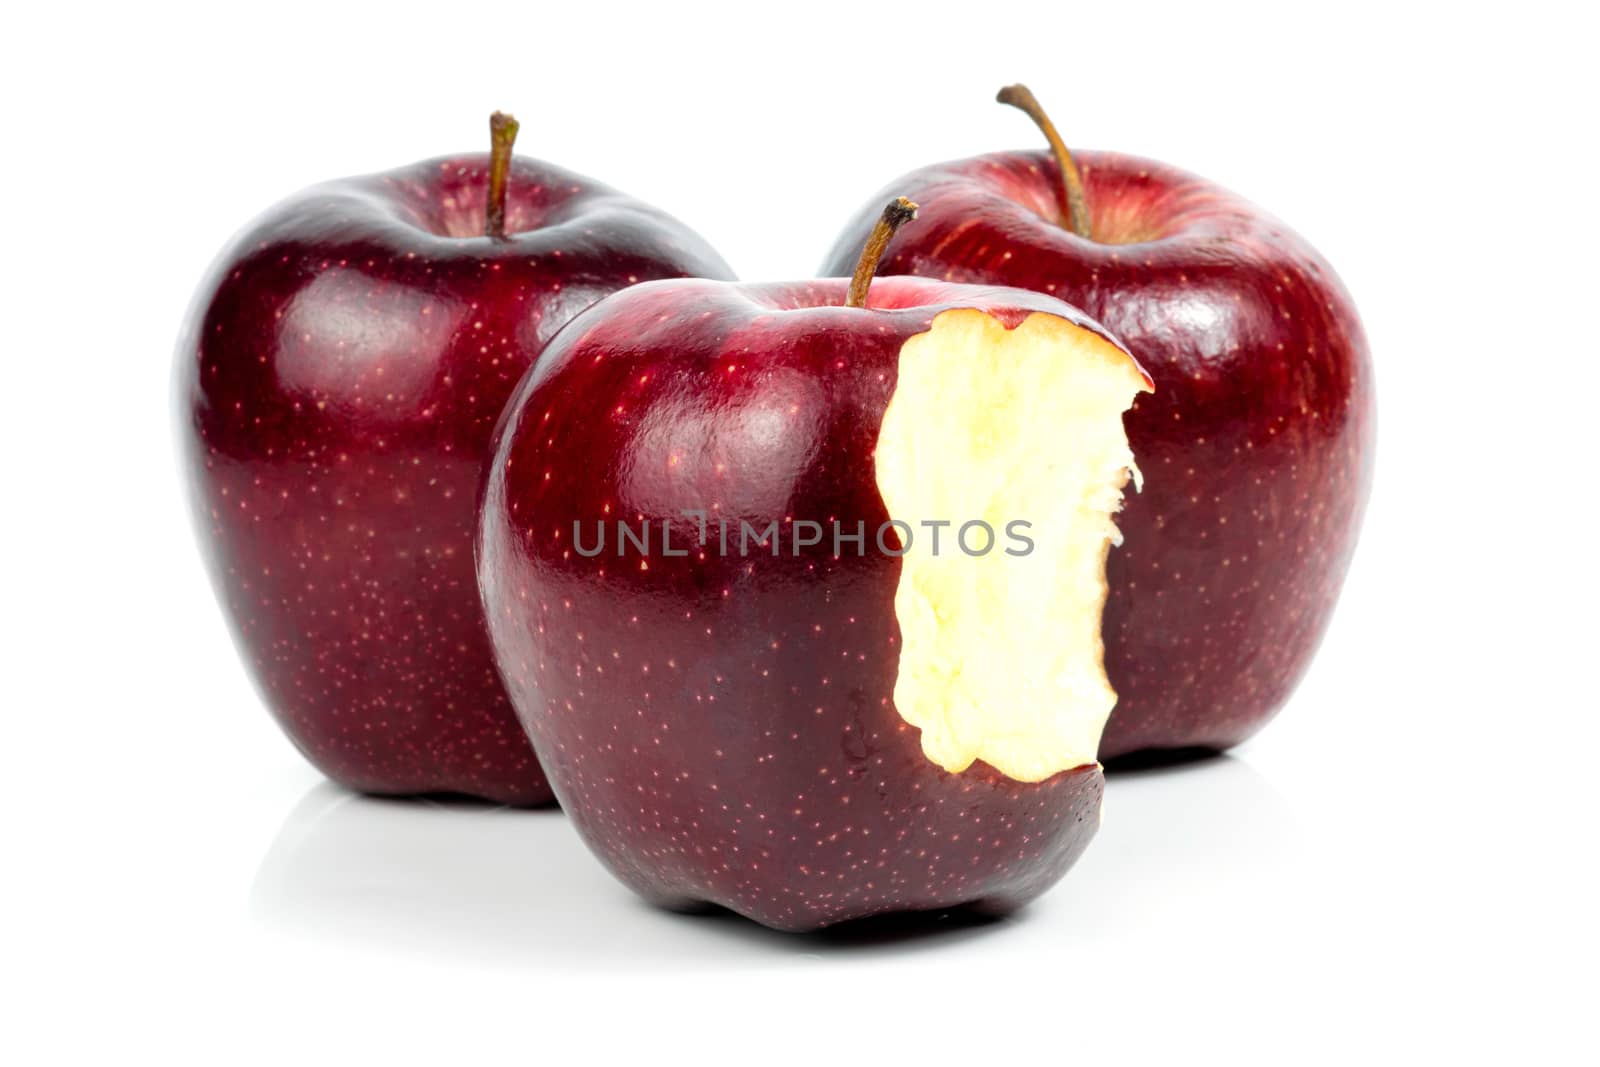 Fresh red apple nibble on a white background